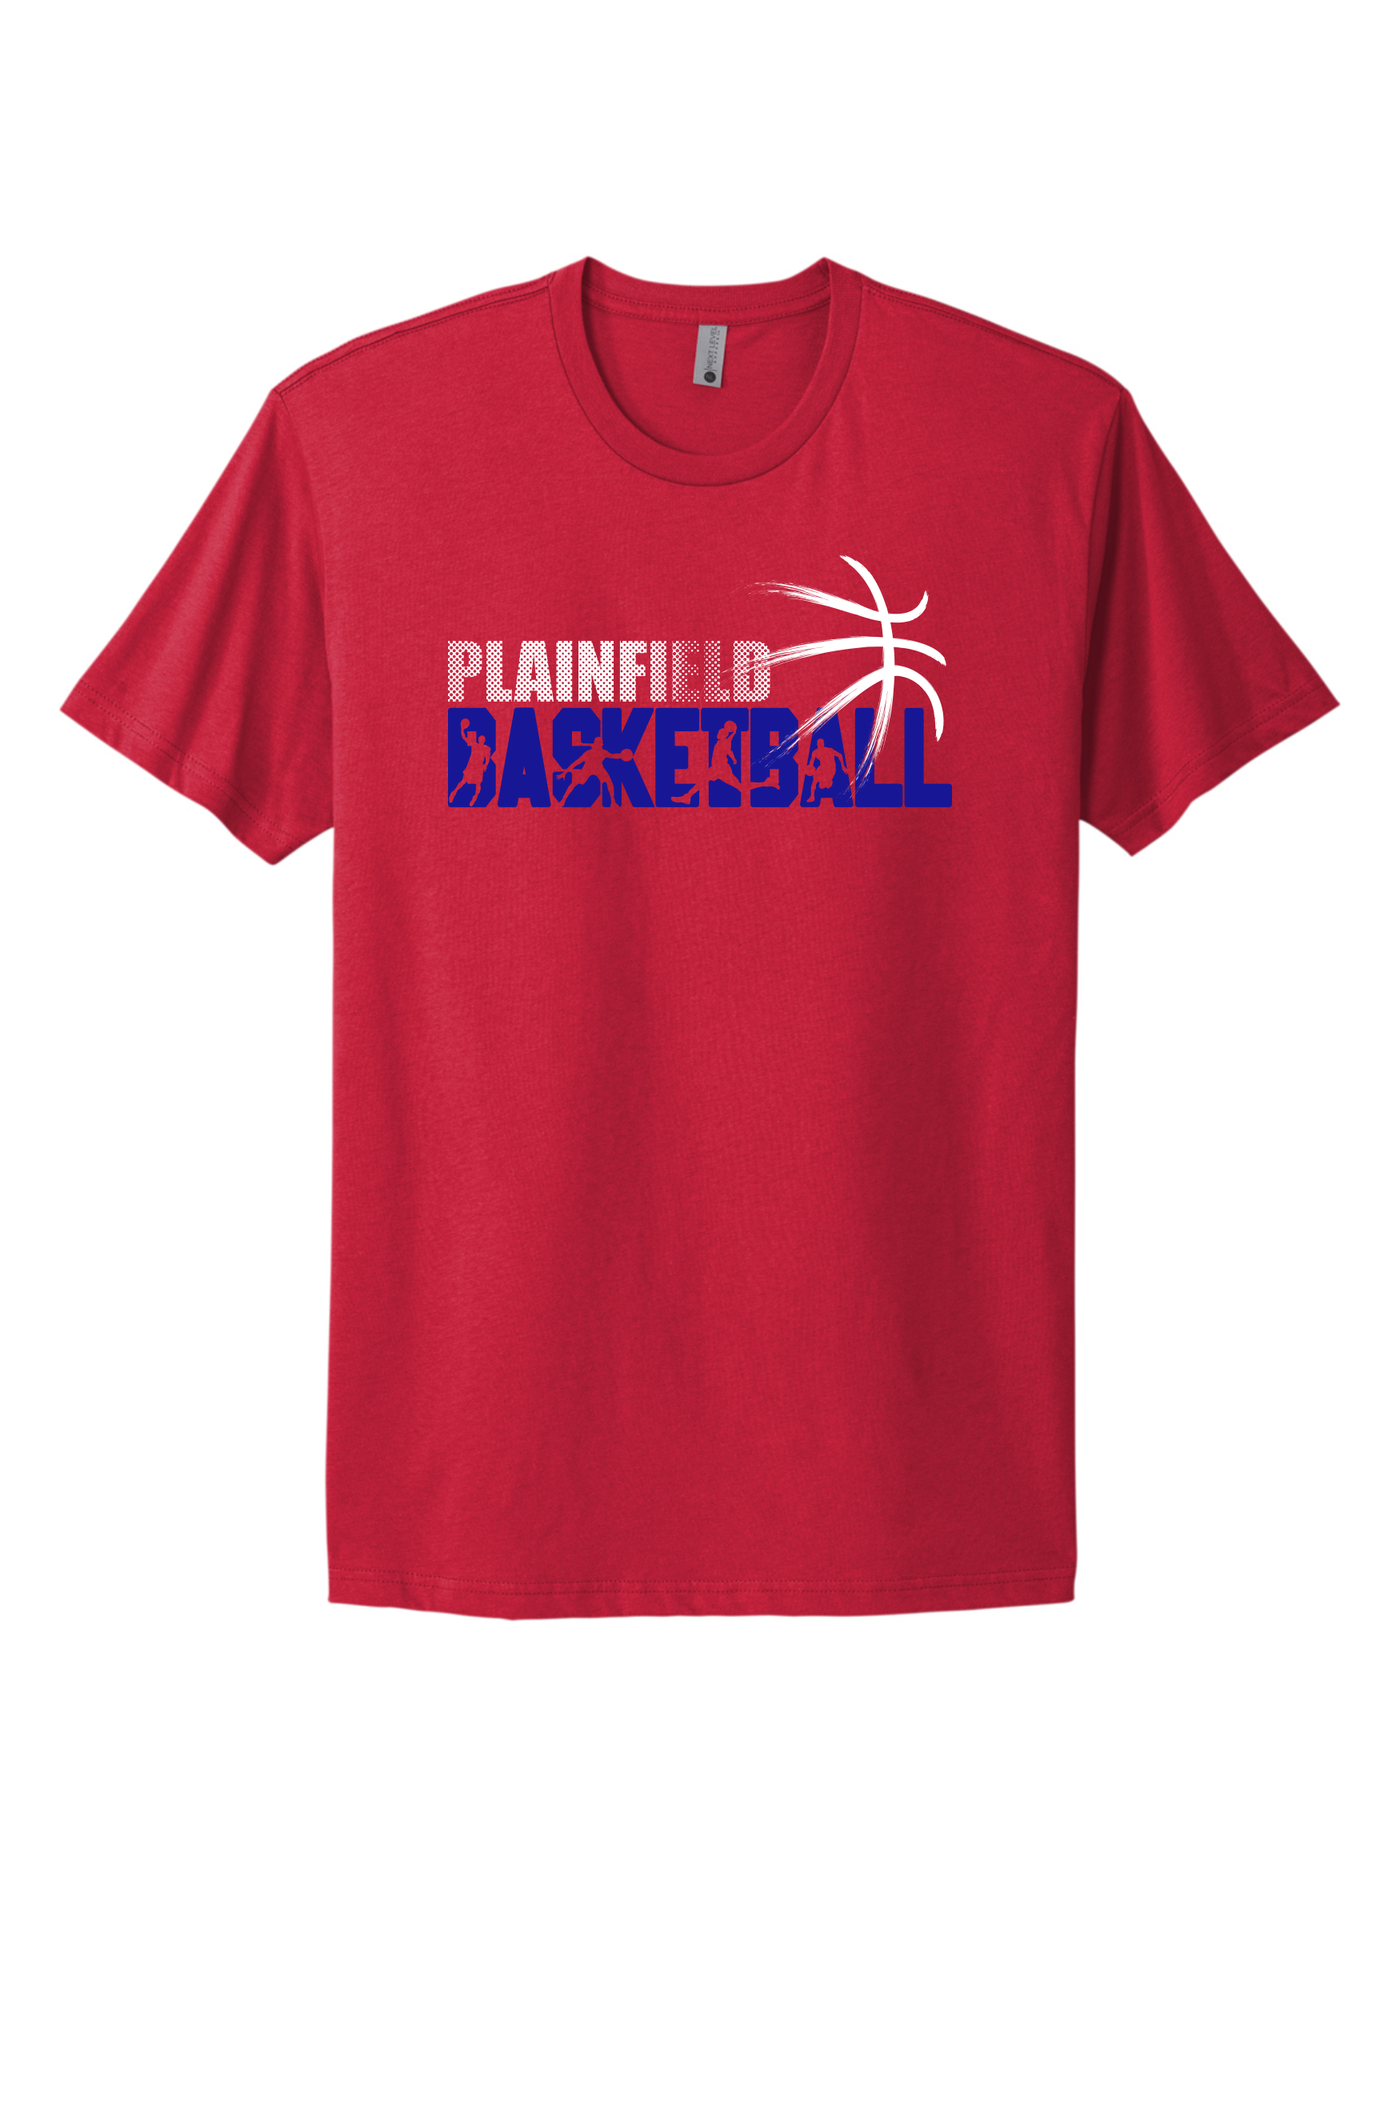 Plainfield Cotton Tee - T3 YOUTH - Y&S Designs, LLC